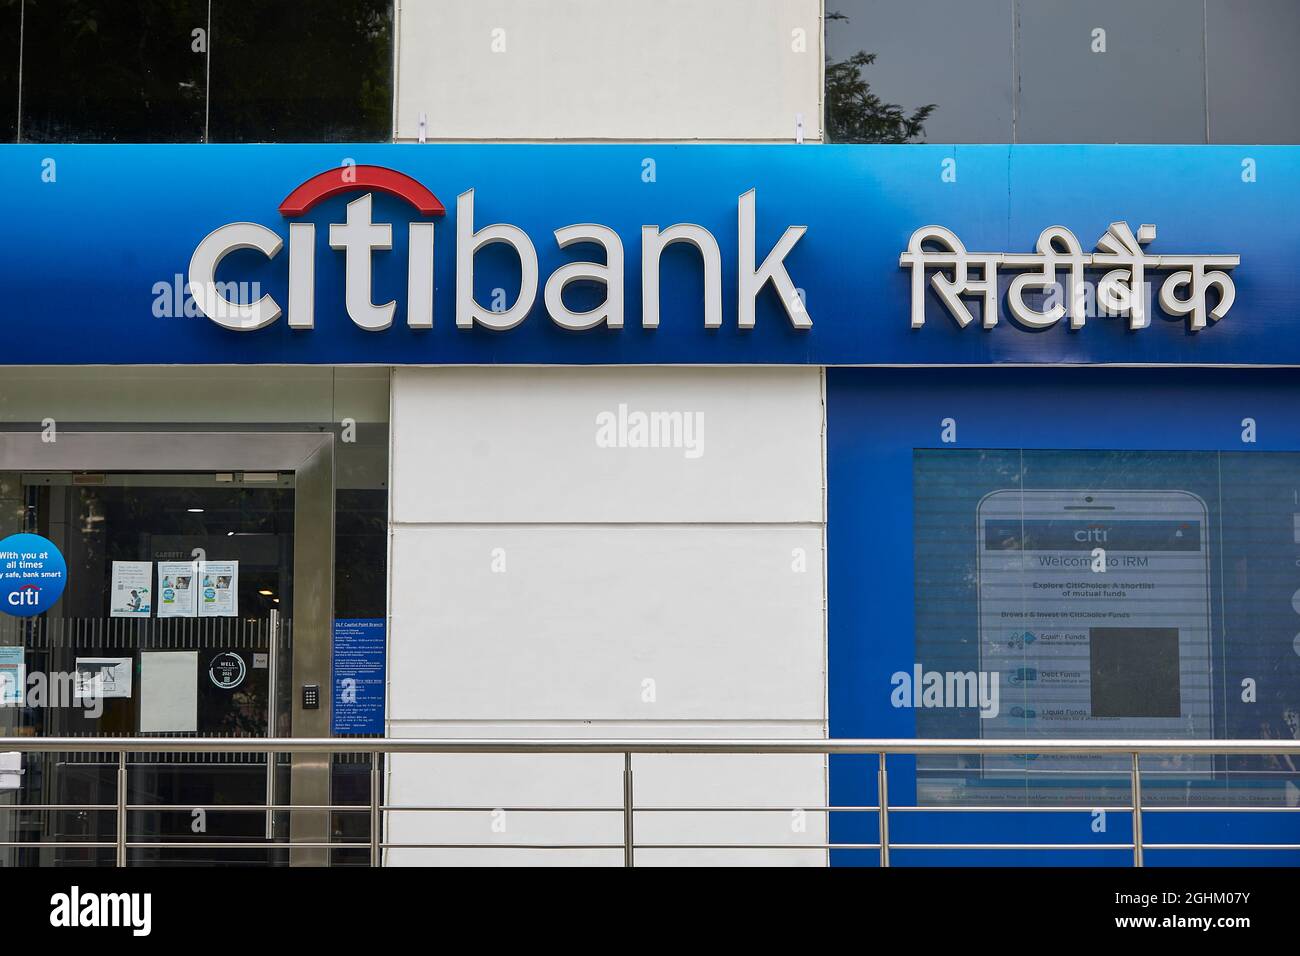 View of the logo and brand name of the global banking firm Citibank. Stock Photo